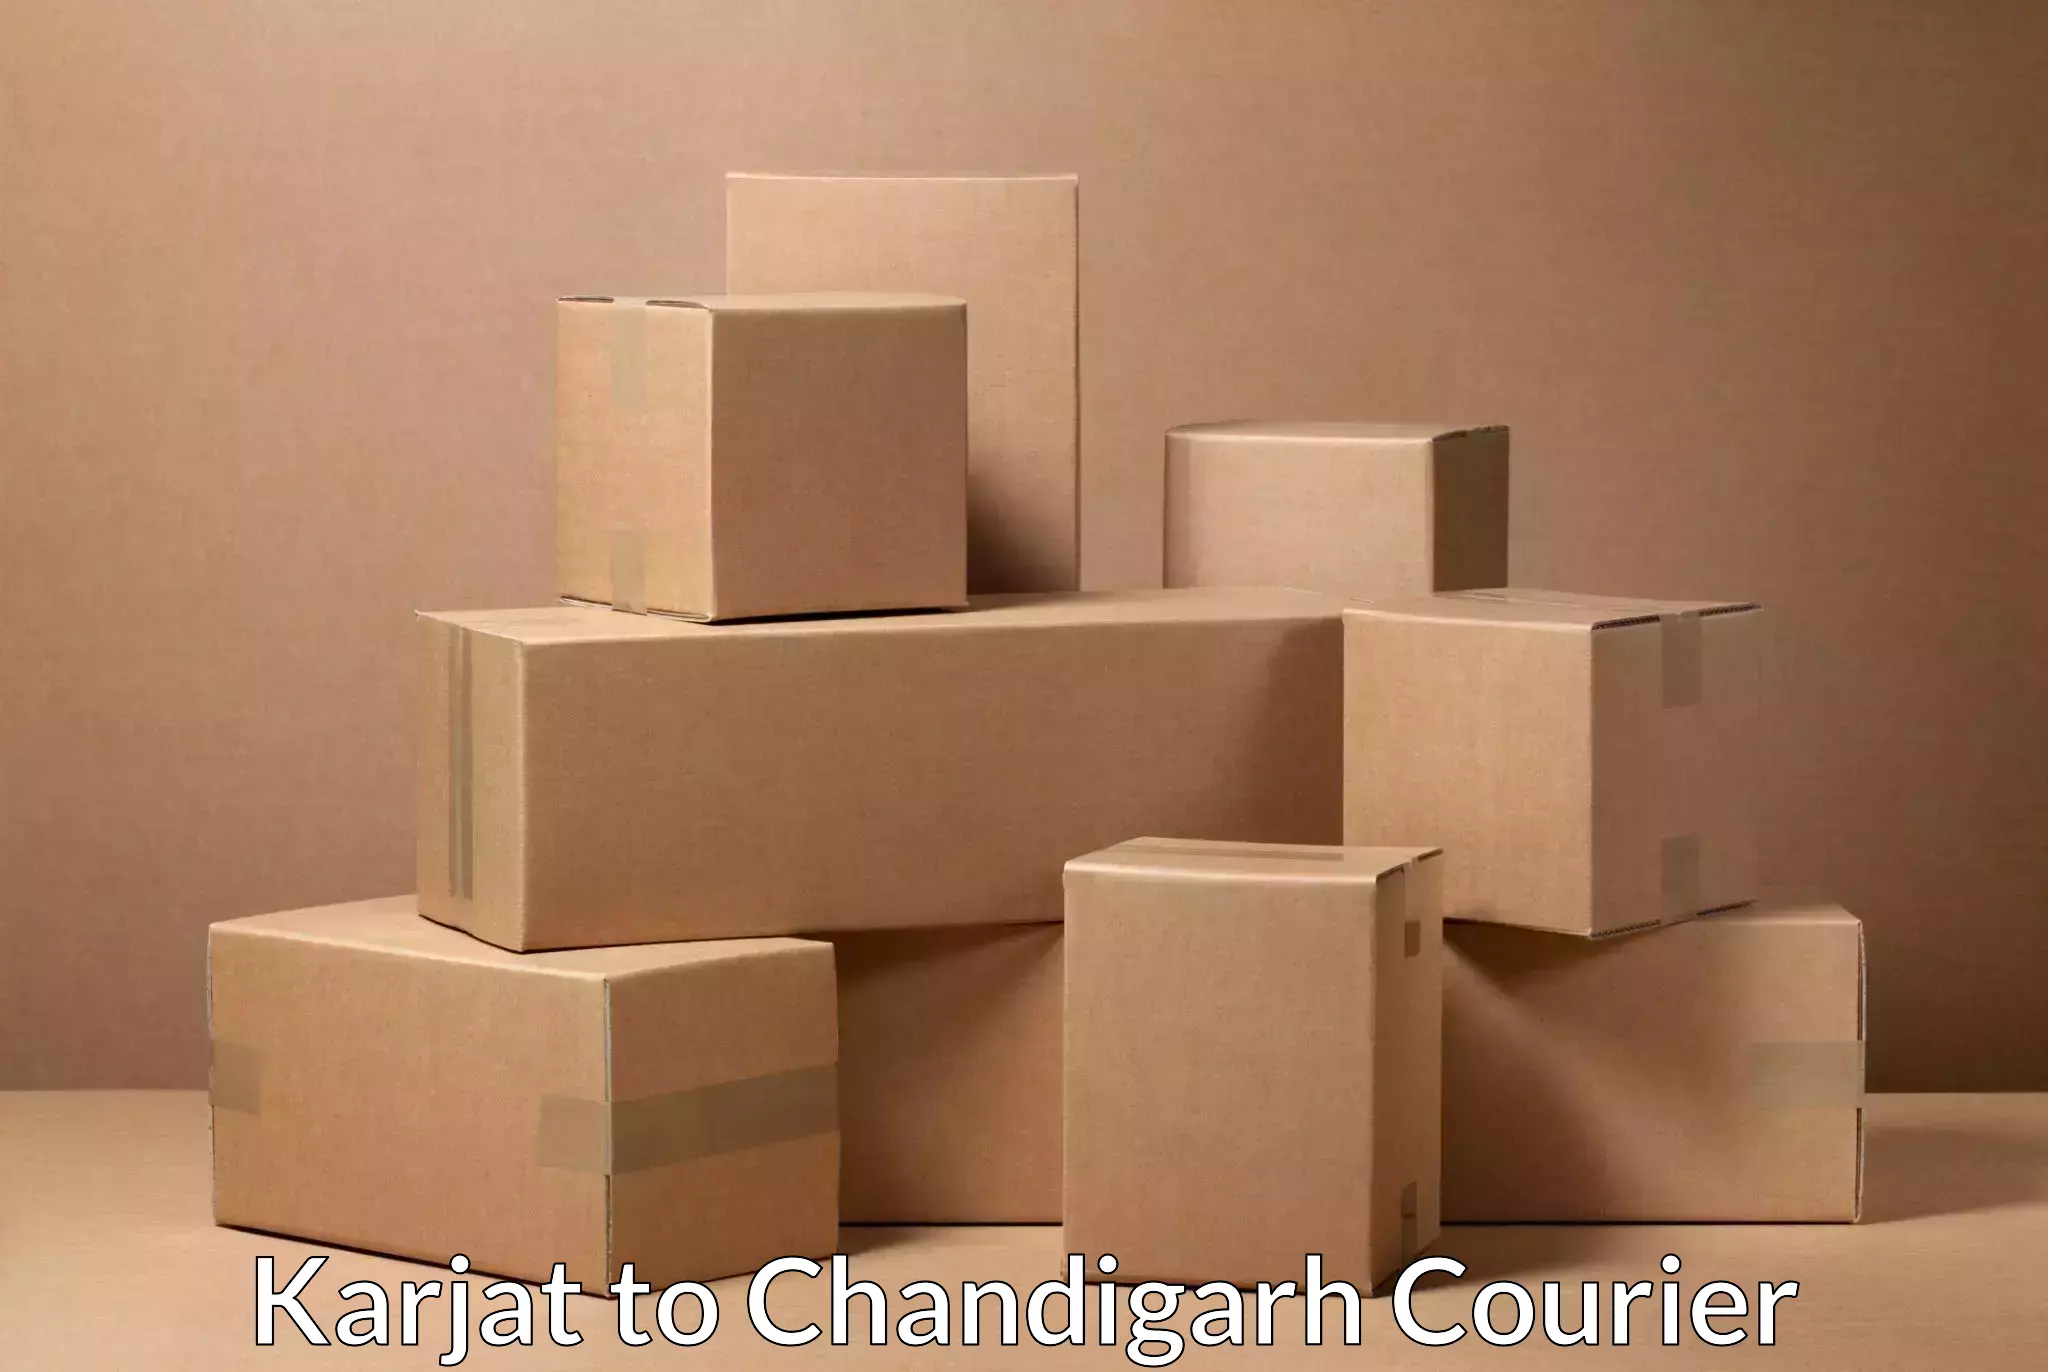 Cash on delivery service Karjat to Chandigarh